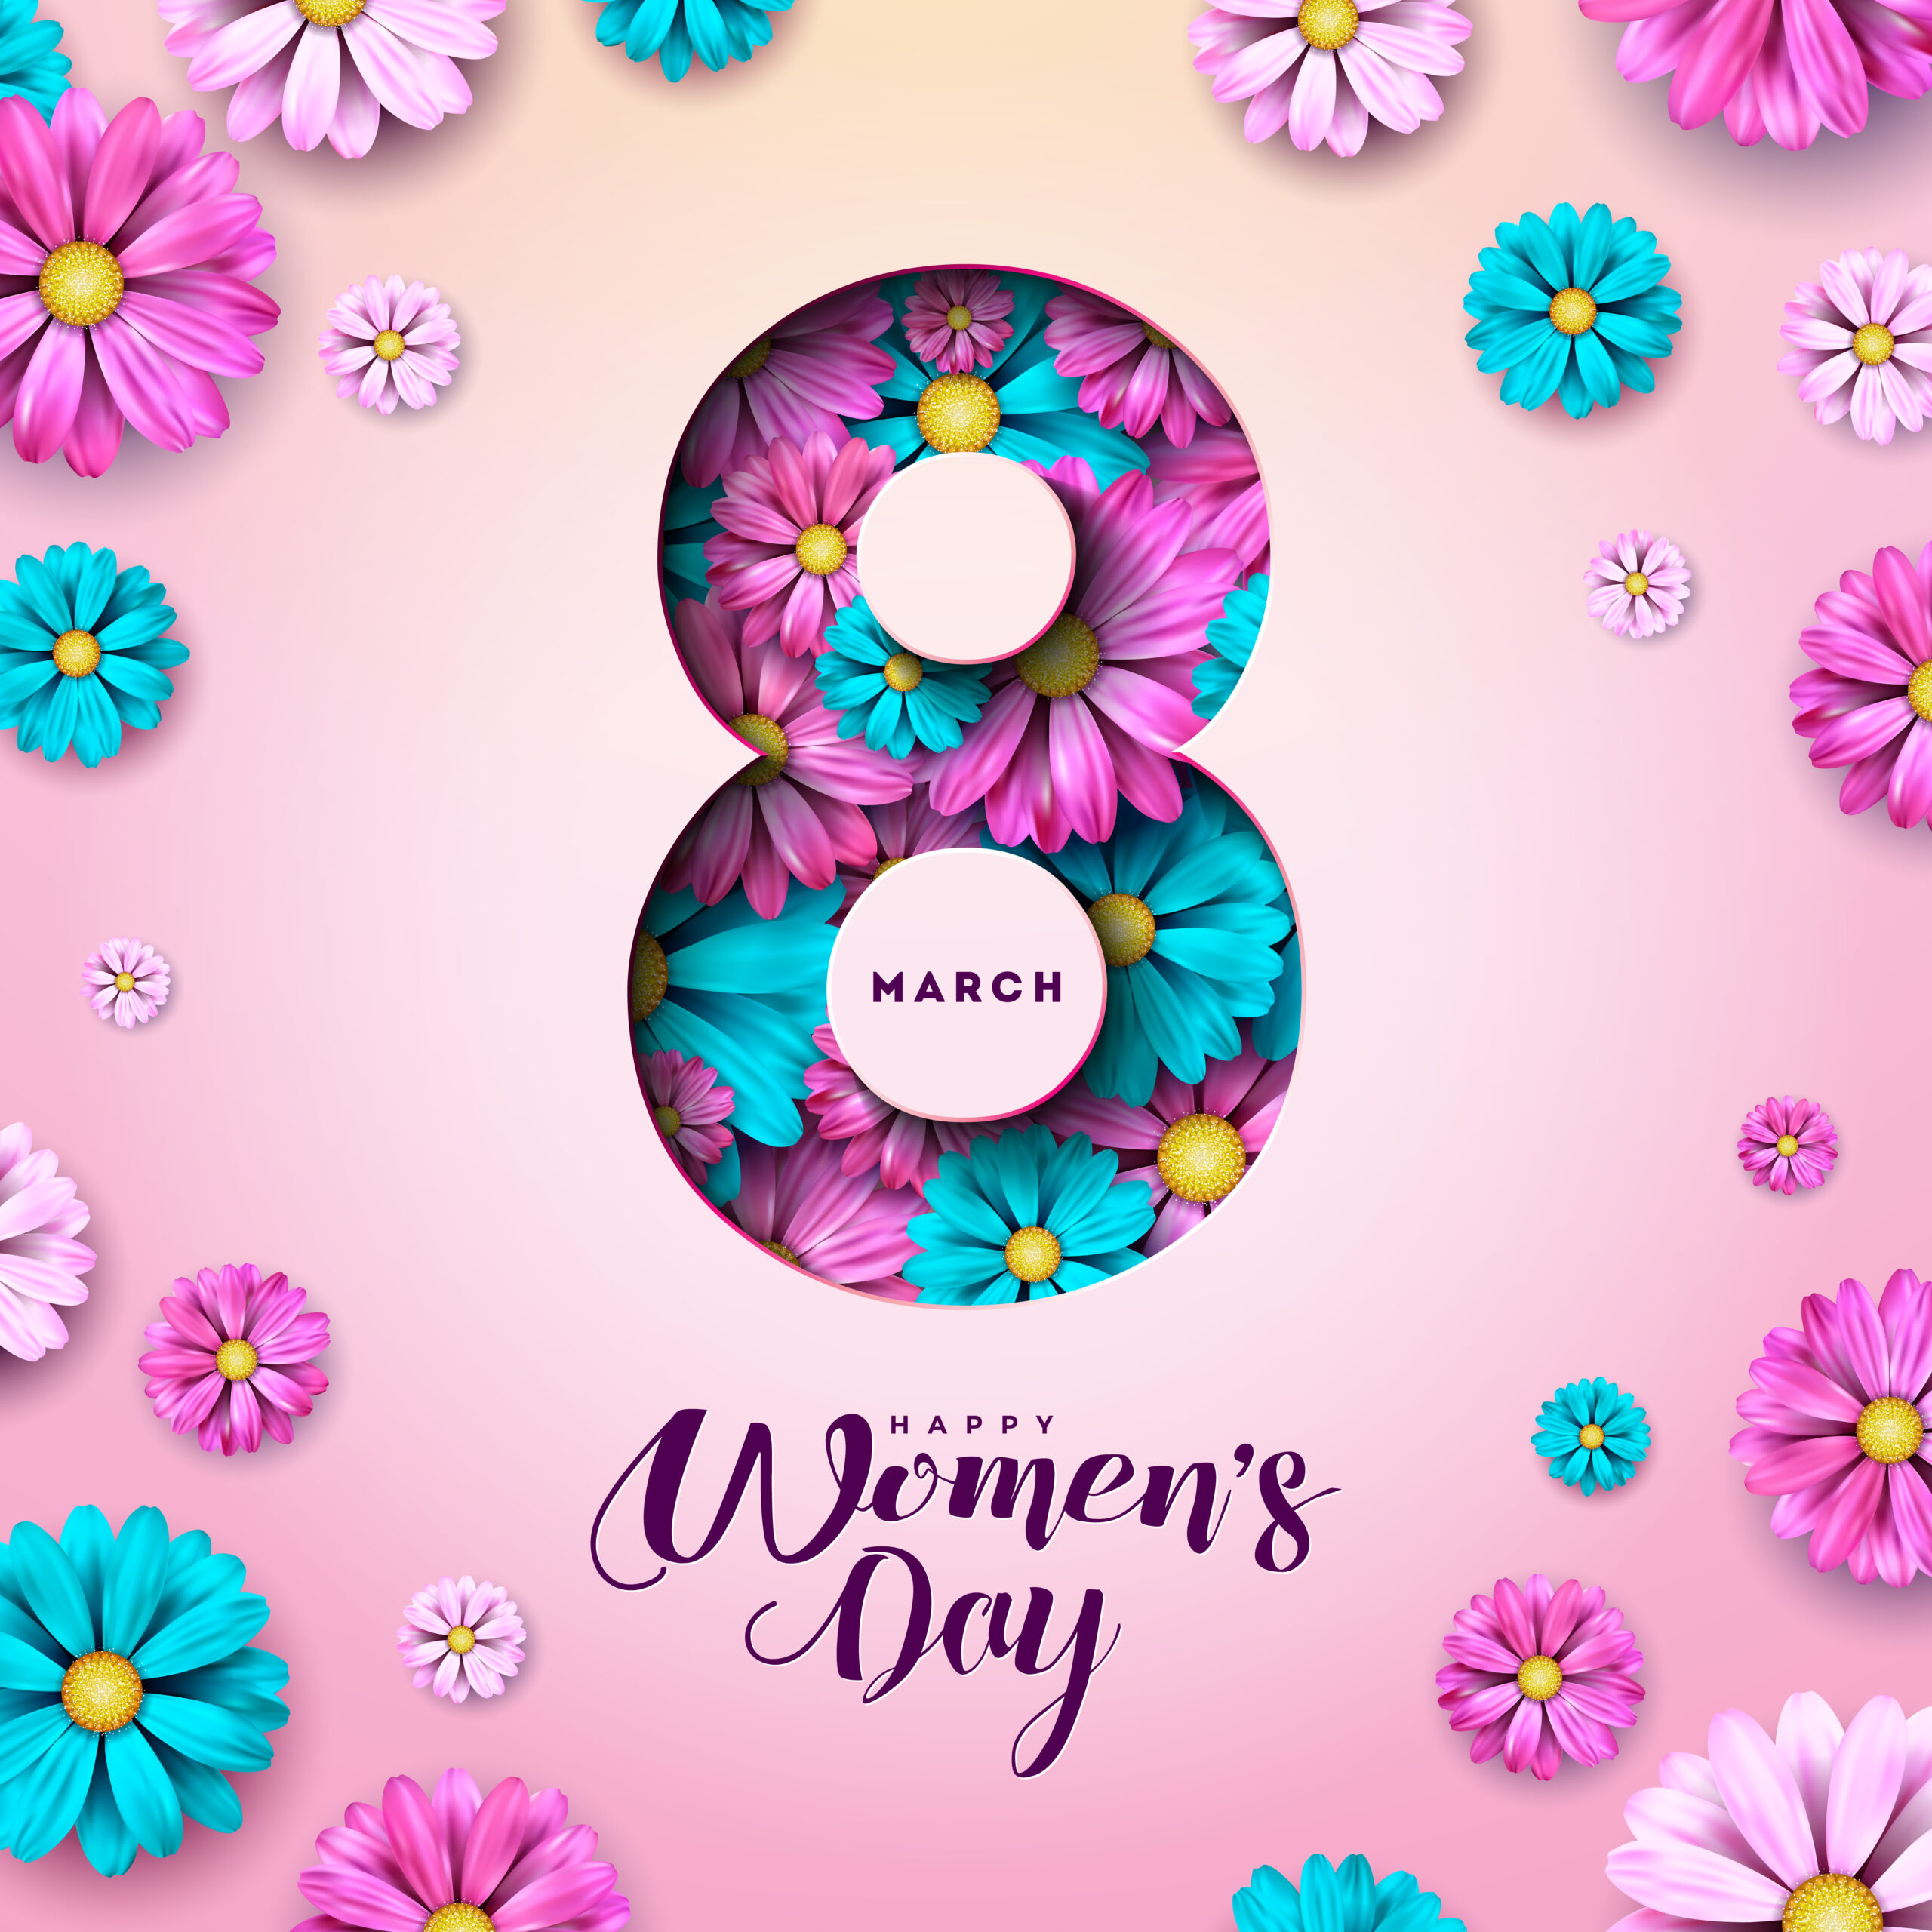 Inspirational Happy Womens Day Quotes